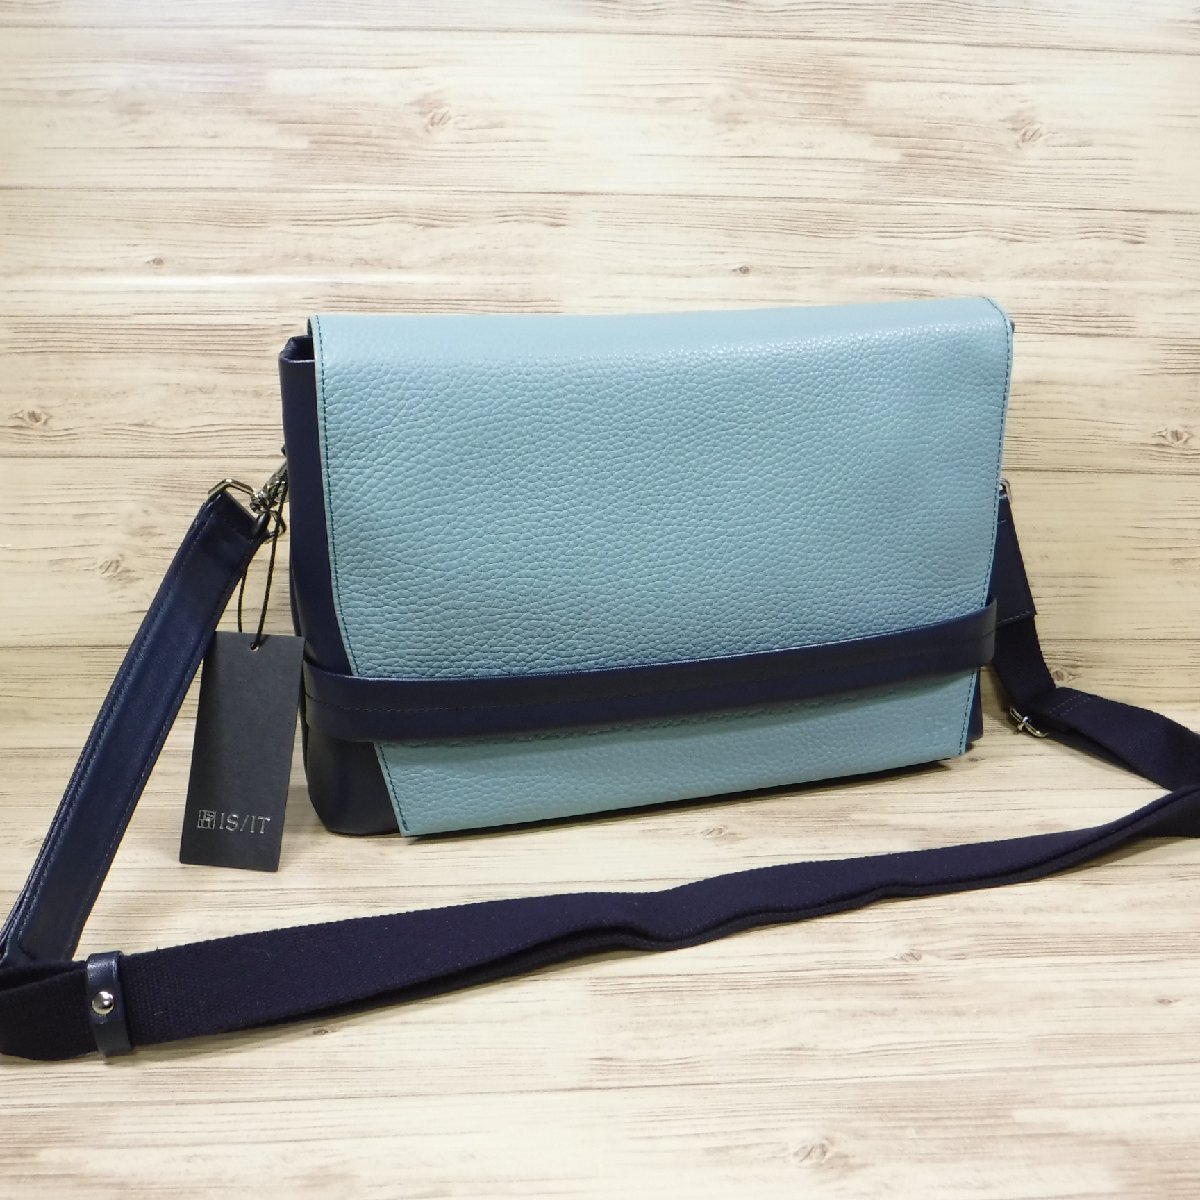 YY711izito regular price 19800 jpy new goods Italy cow leather leather shoulder bag 4WAY clutch bag combined use navy blue blue made in Japan IS/ITka start 939201